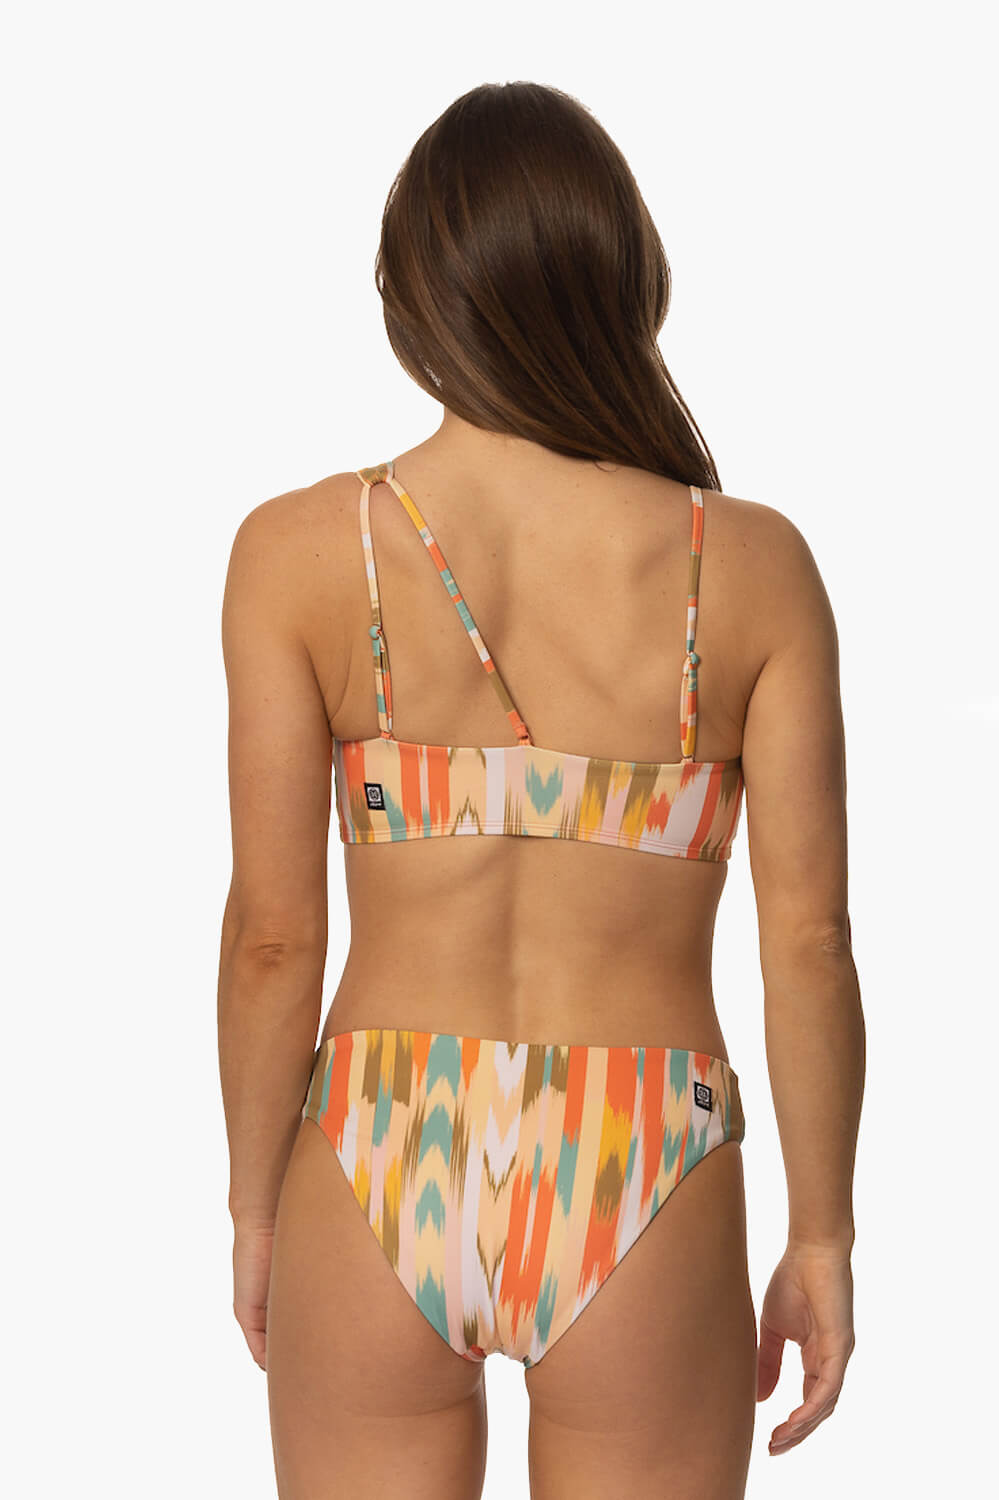 The Line Pool Top, D+ Cup Bikini, Form and Fold Larger Bust Swimwear